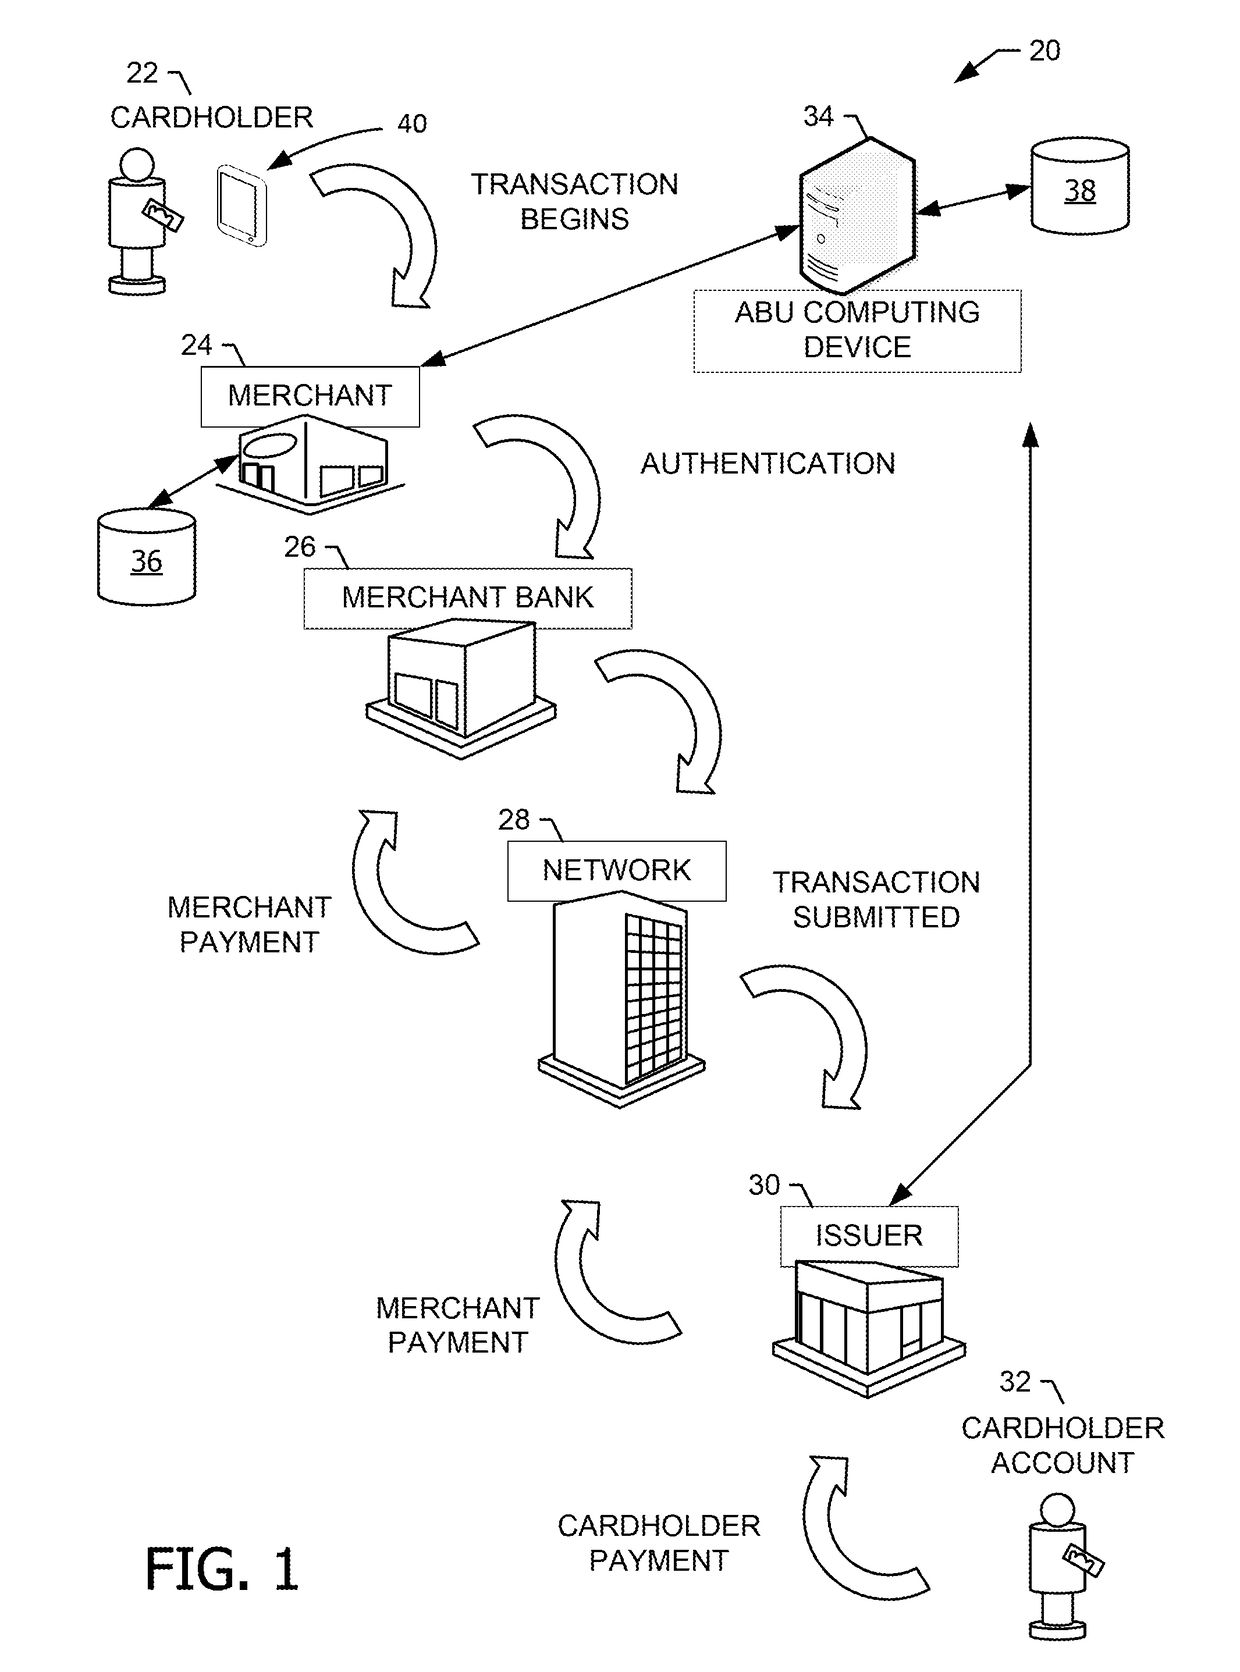 Systems and methods for detecting data inconsistencies